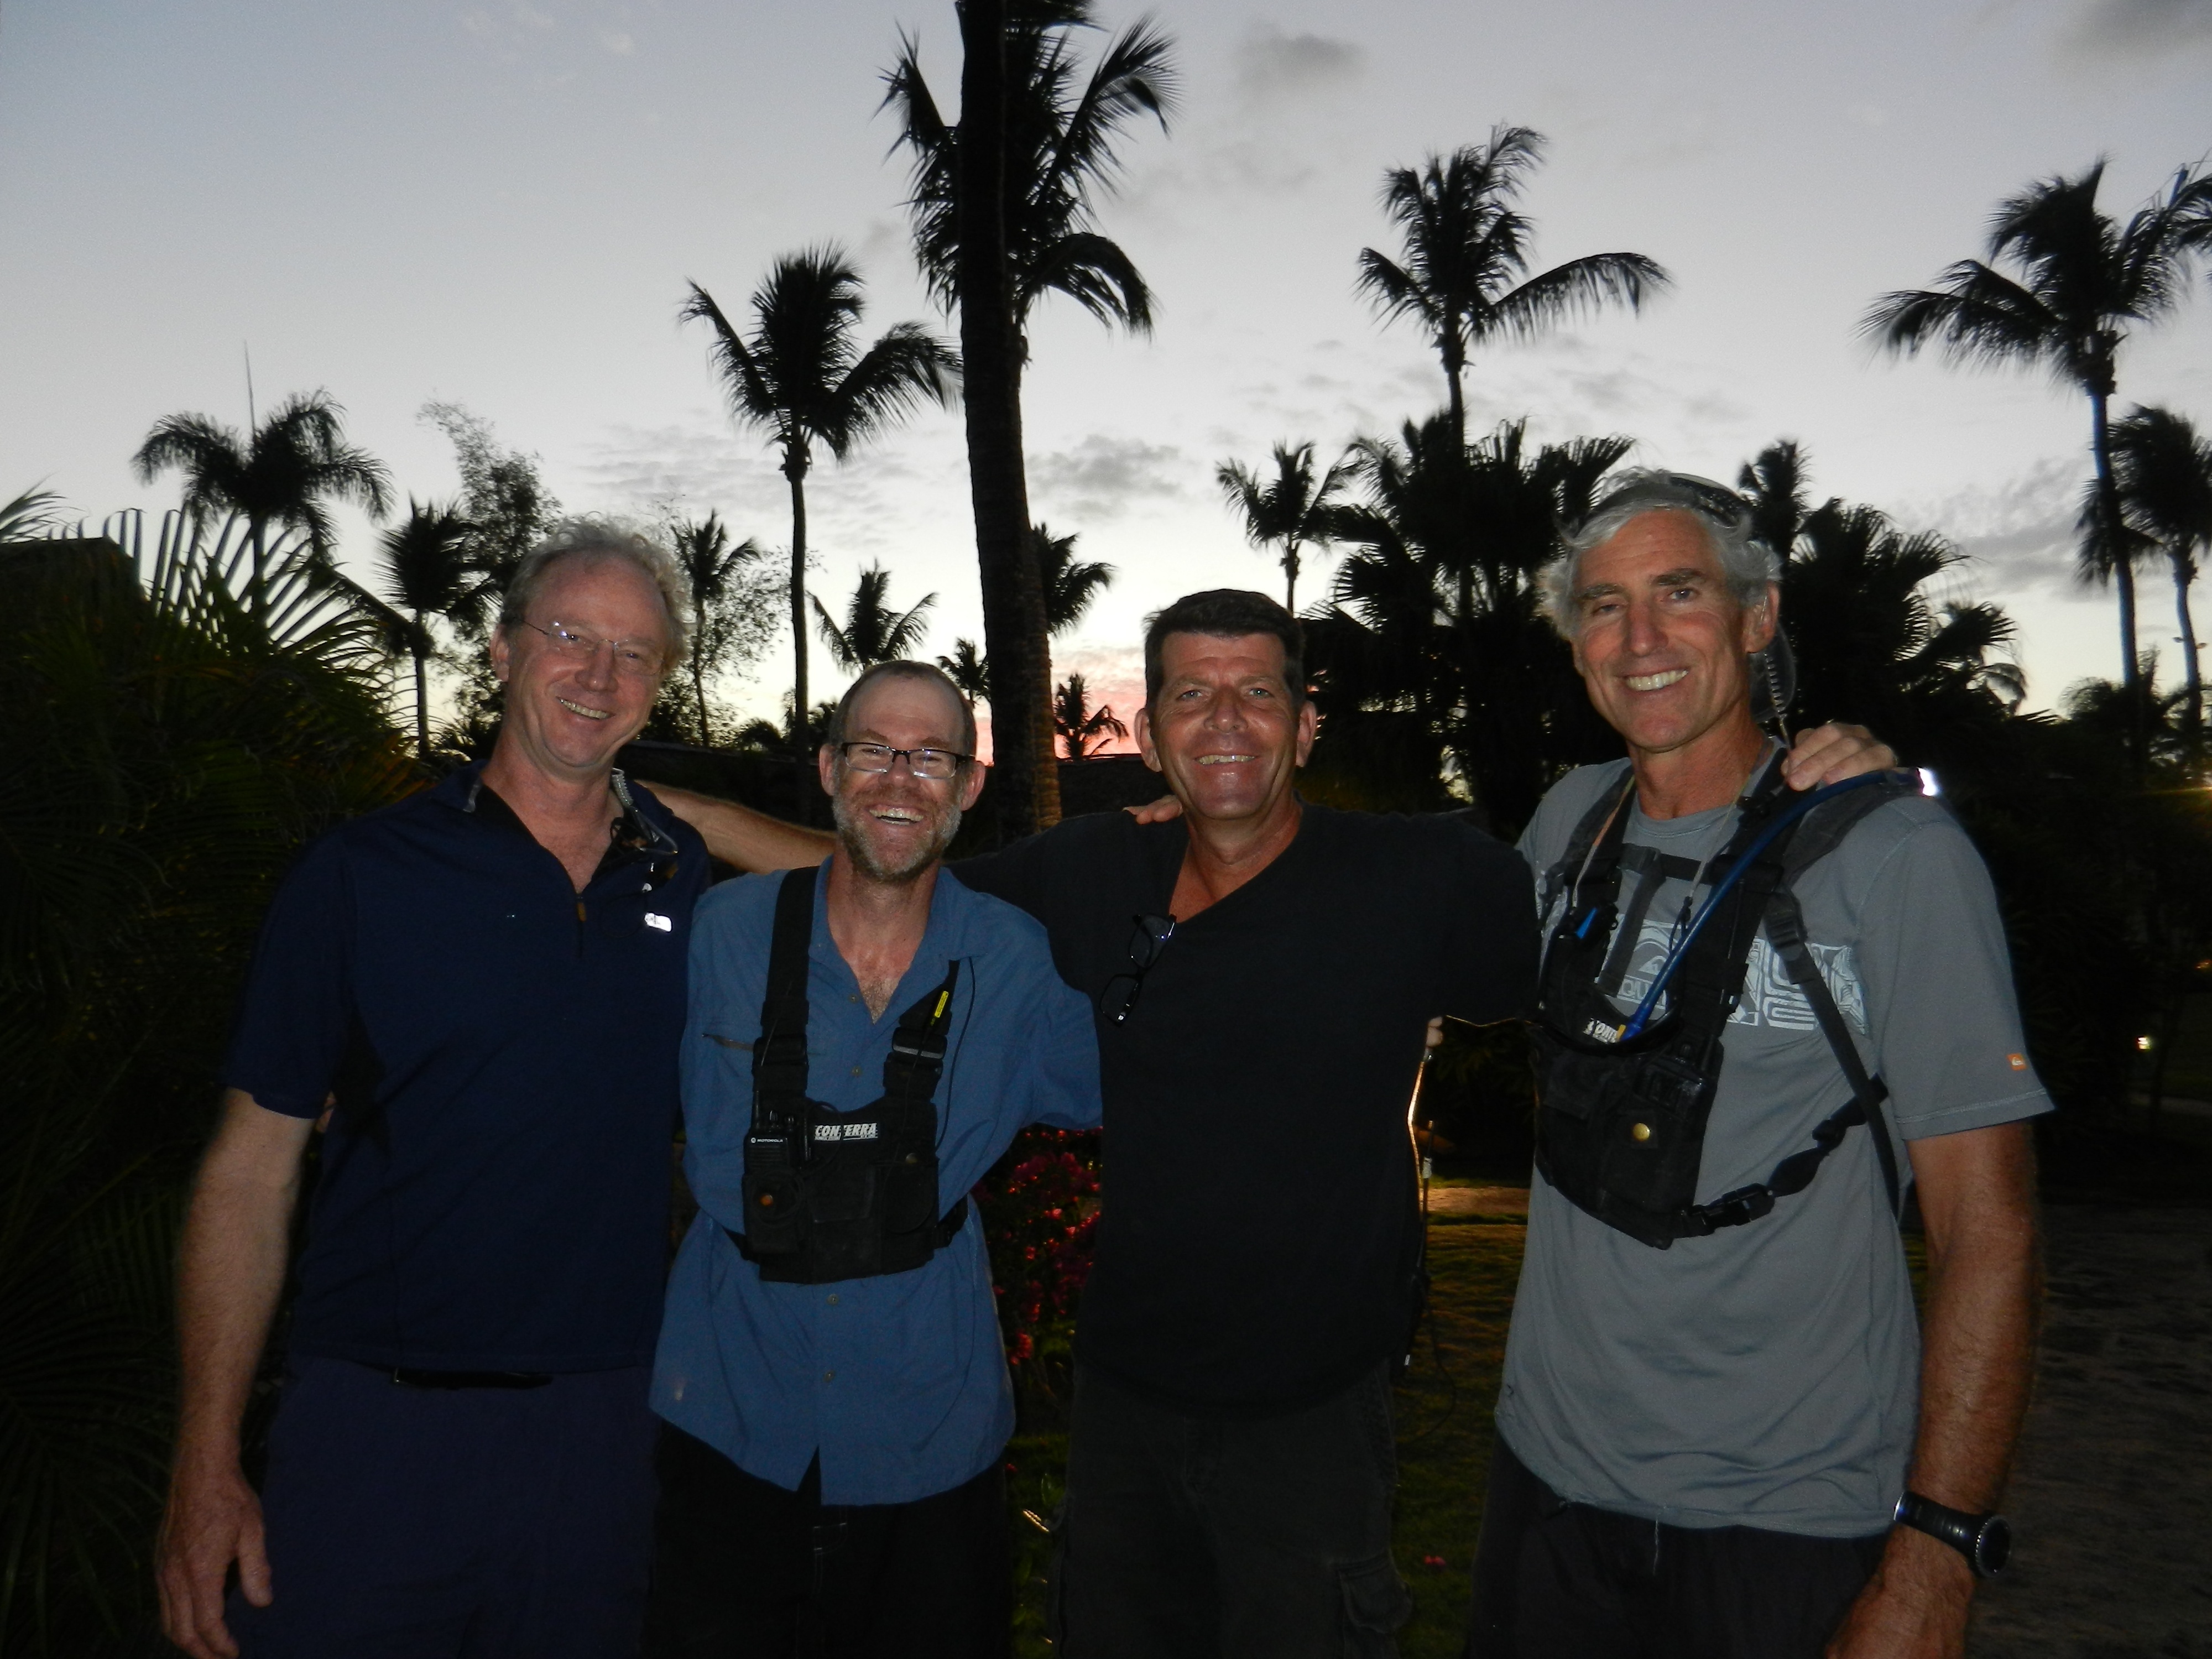 Happy Cameramen! The end of another day in paradise on NBC's 